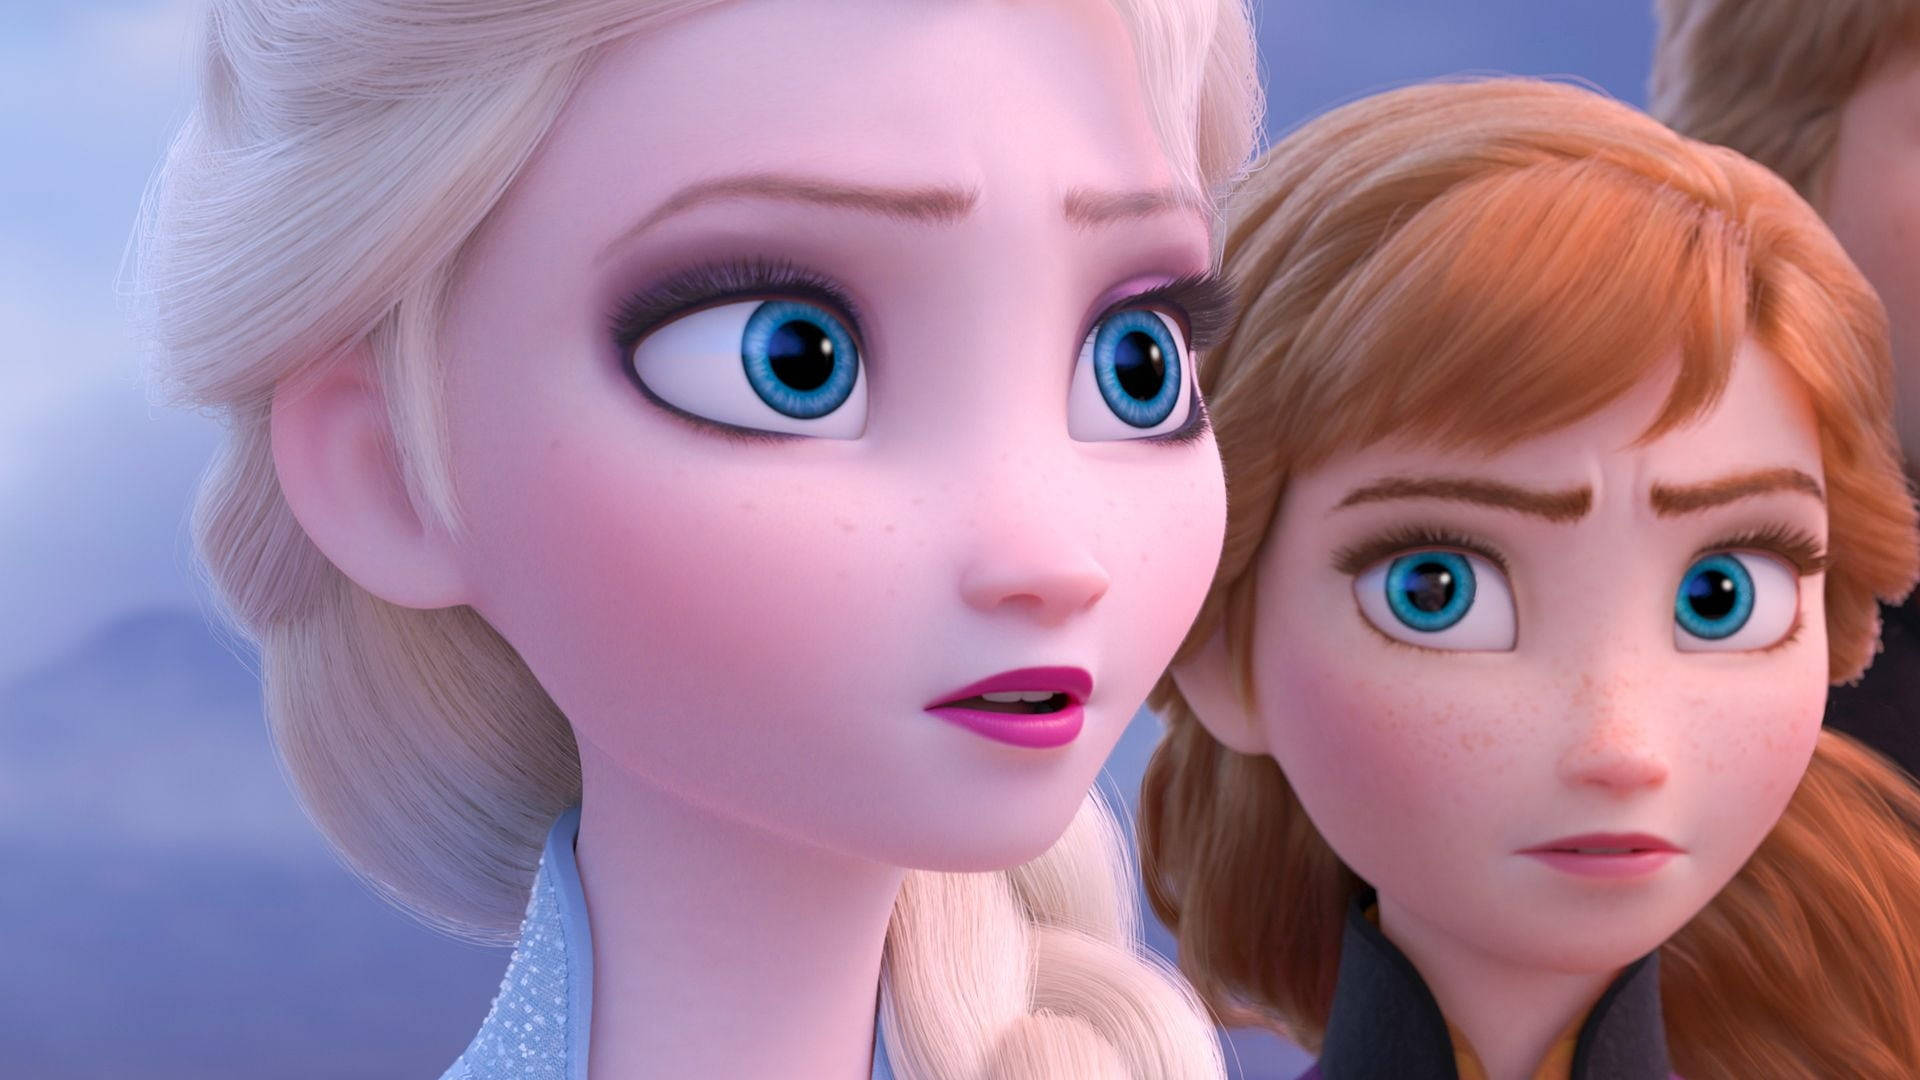 Endearing Sisters: Elsa And Anna Strategizing